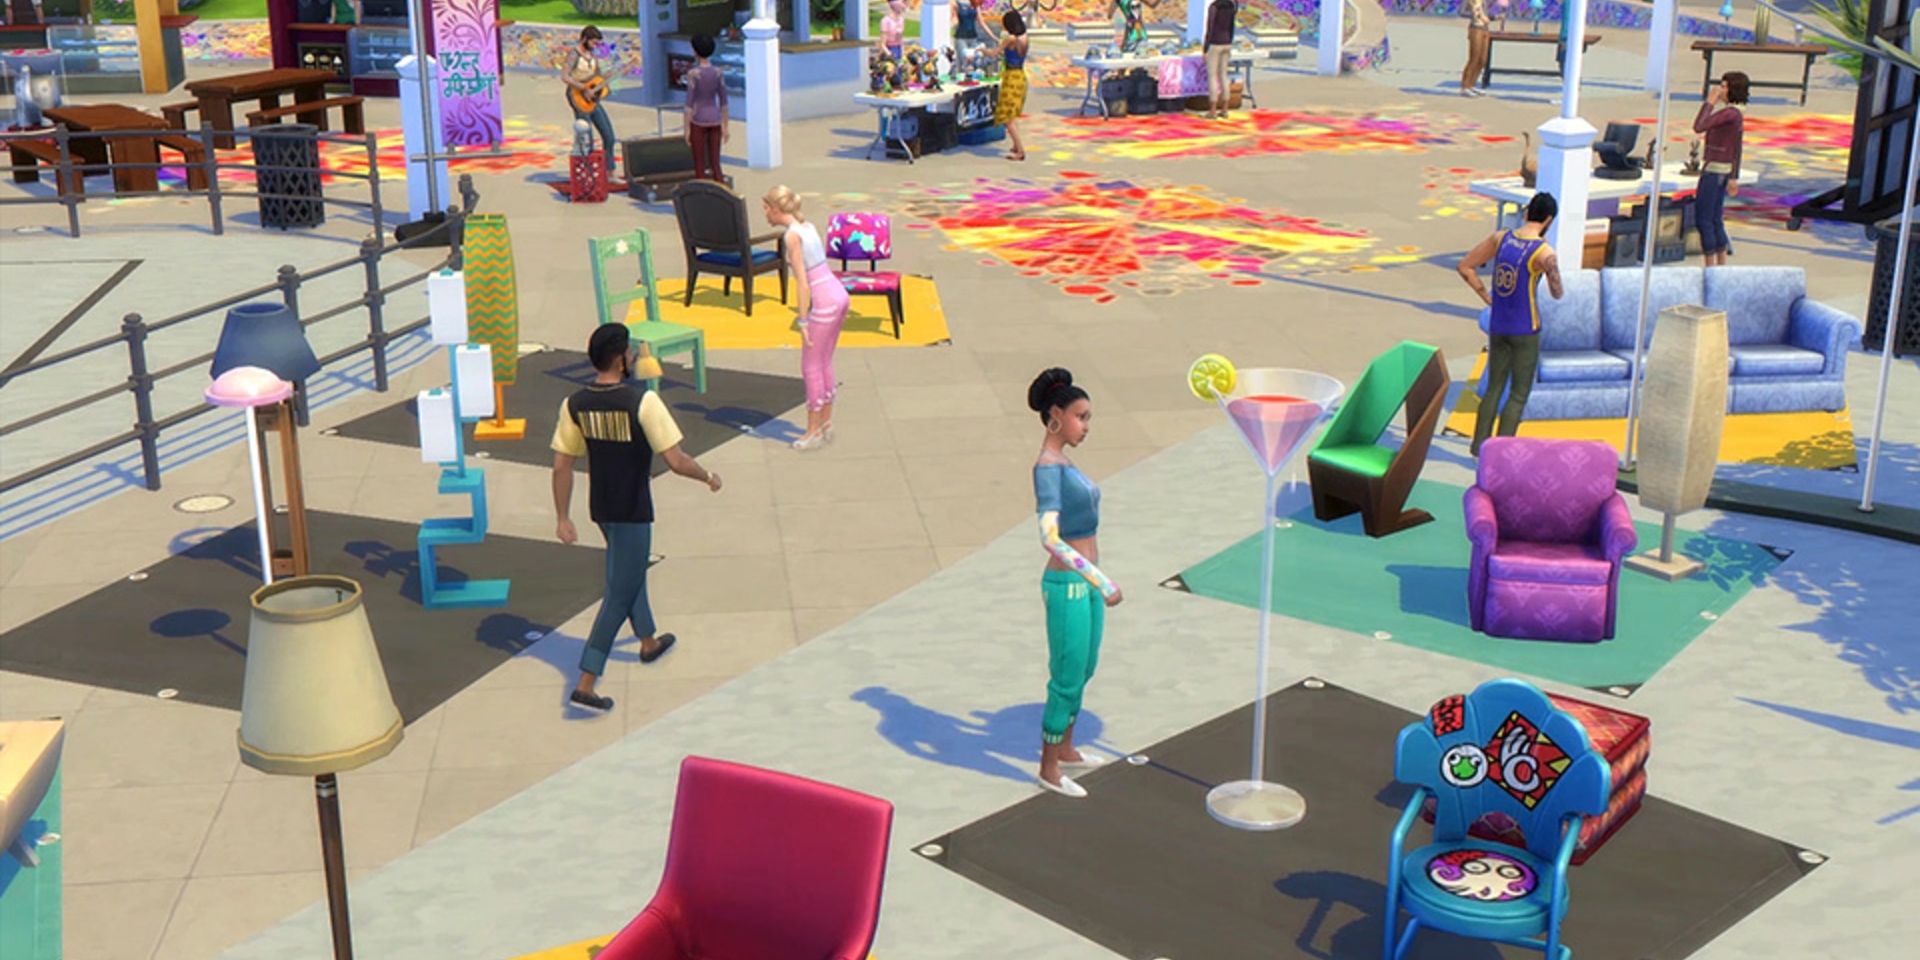 Sims walking around the Flea Market and checking out various furniture on display